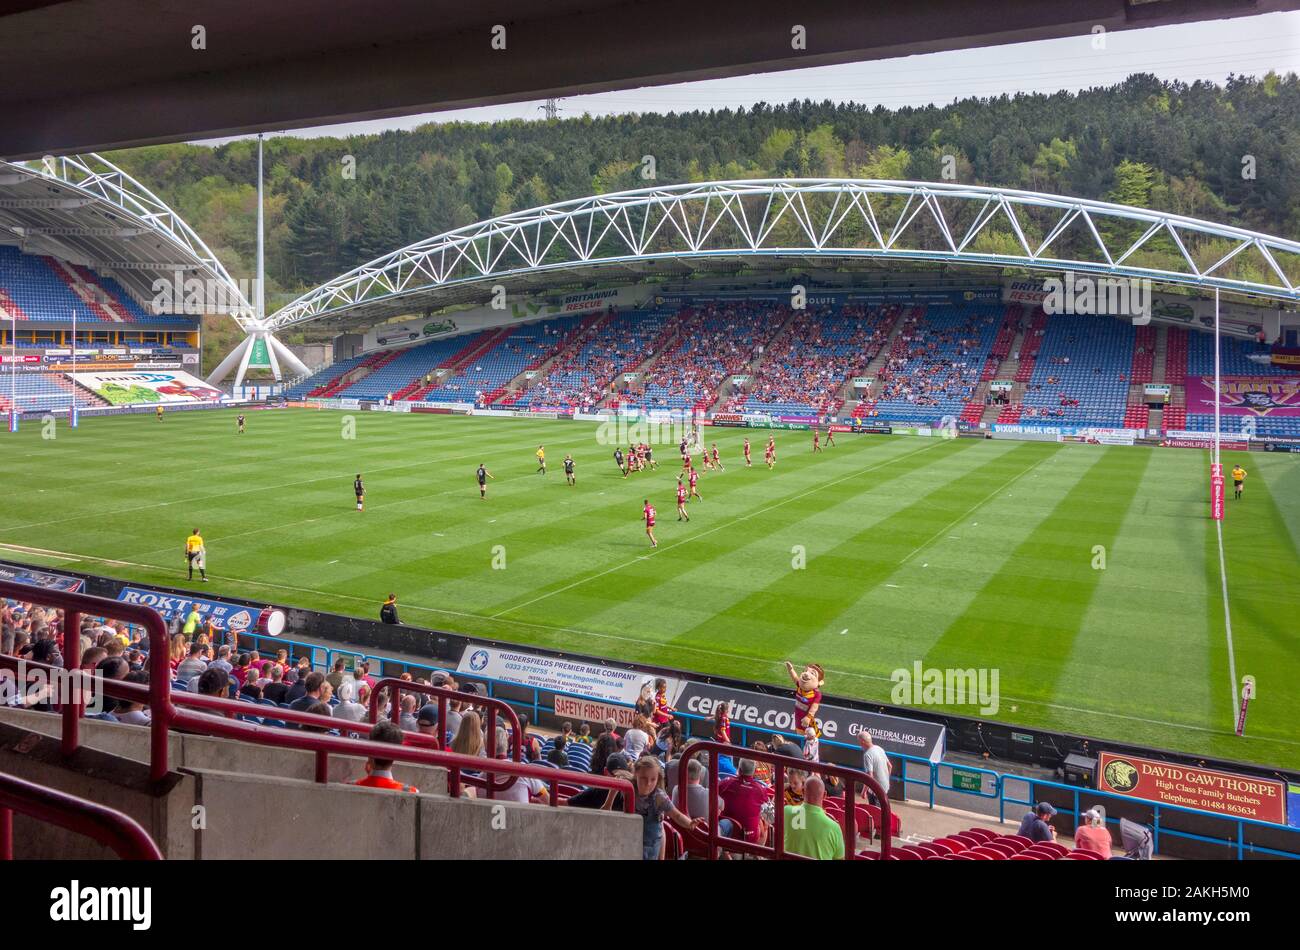 View from the stands of a Rugby League match between Huddersfield Giants and London Broncos, John Smith's Stadium, Huddersfield, West Yorkshire, UK Stock Photo